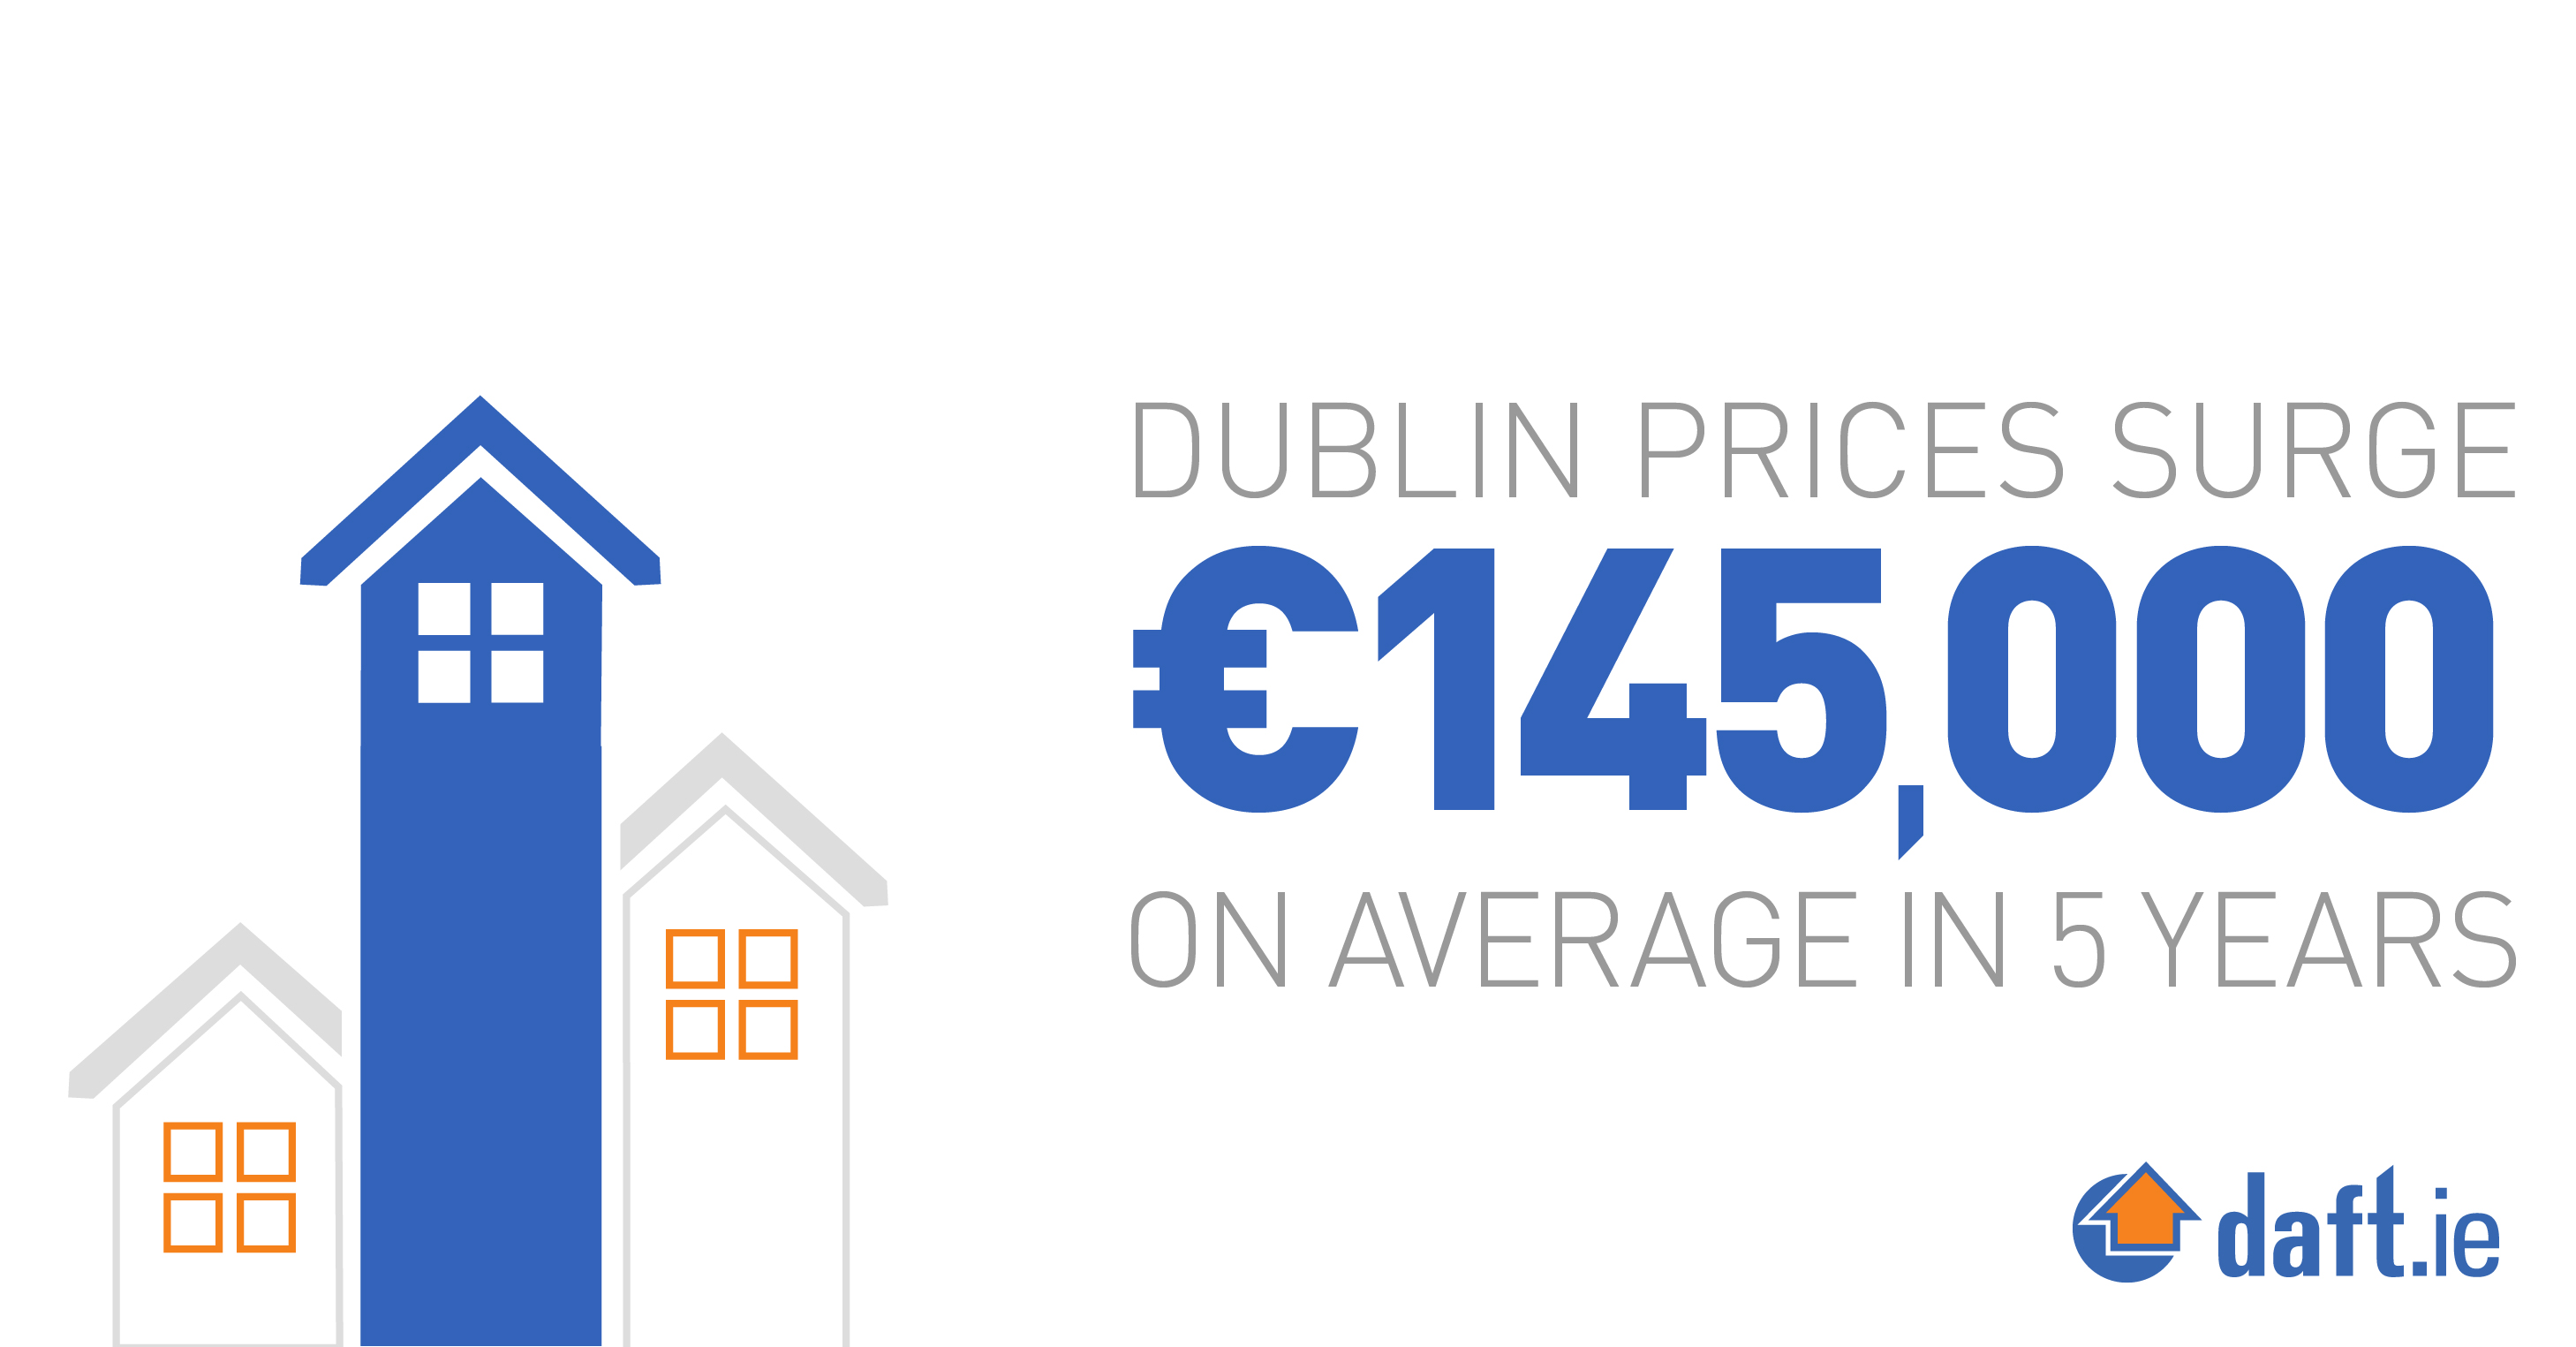 Dublin prices surge €145,000 on average in 5 years